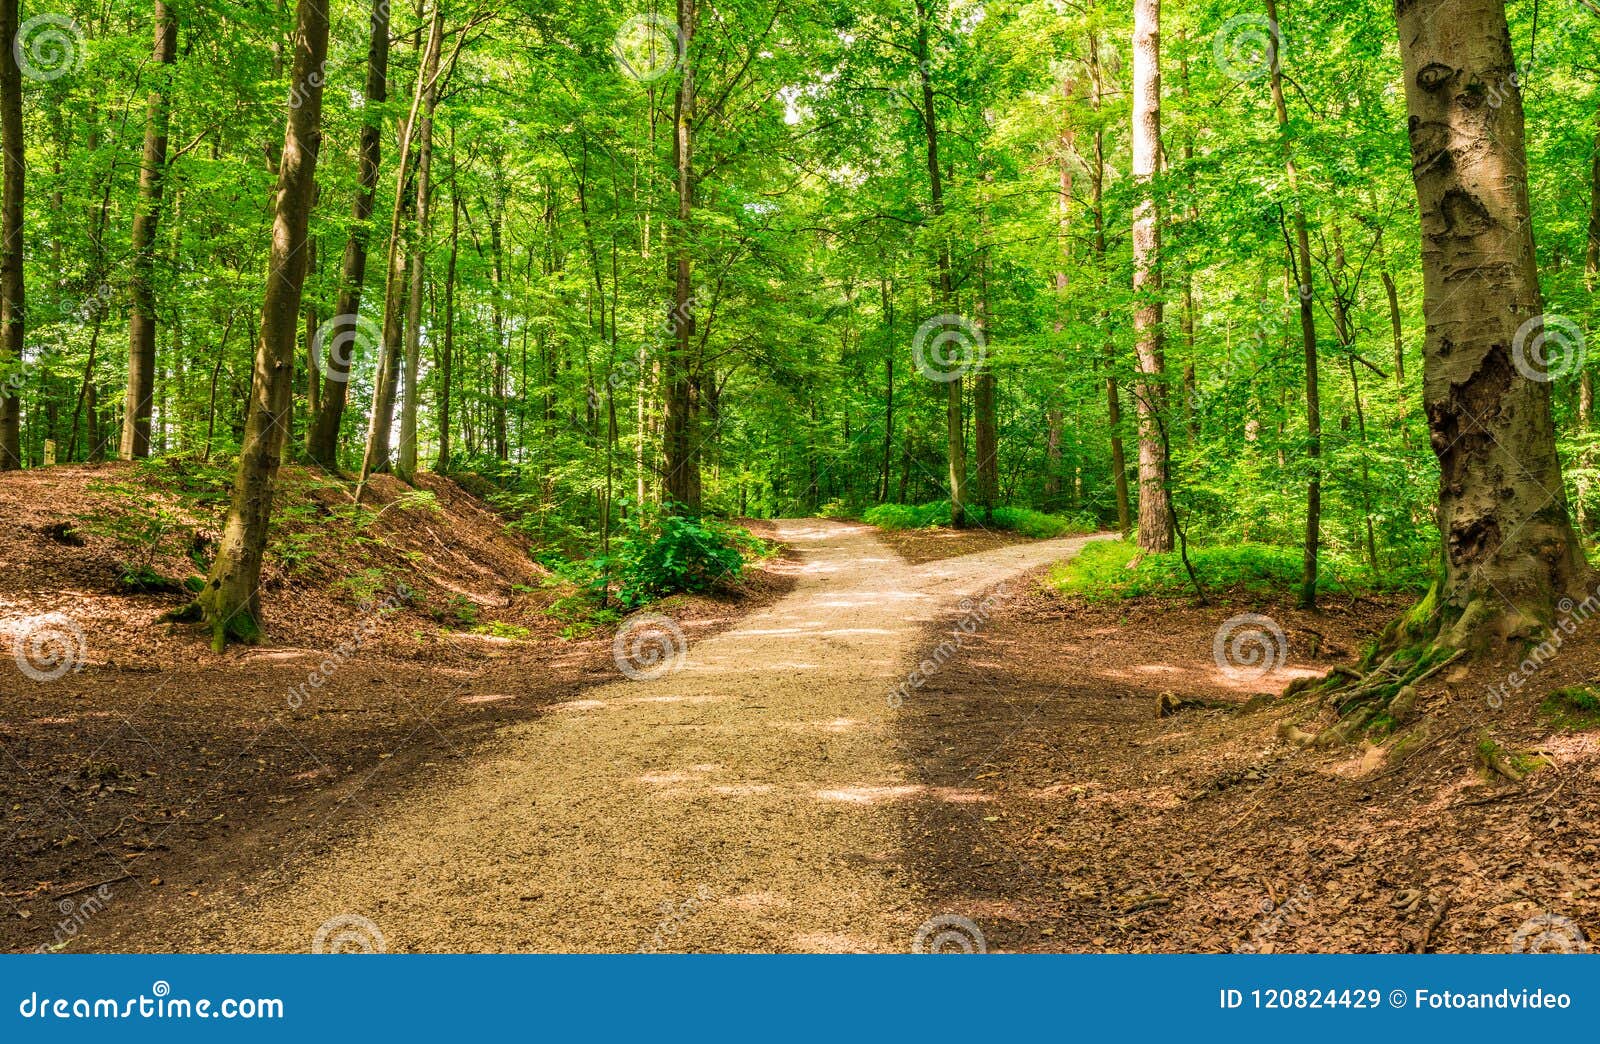 forked roads in green forest